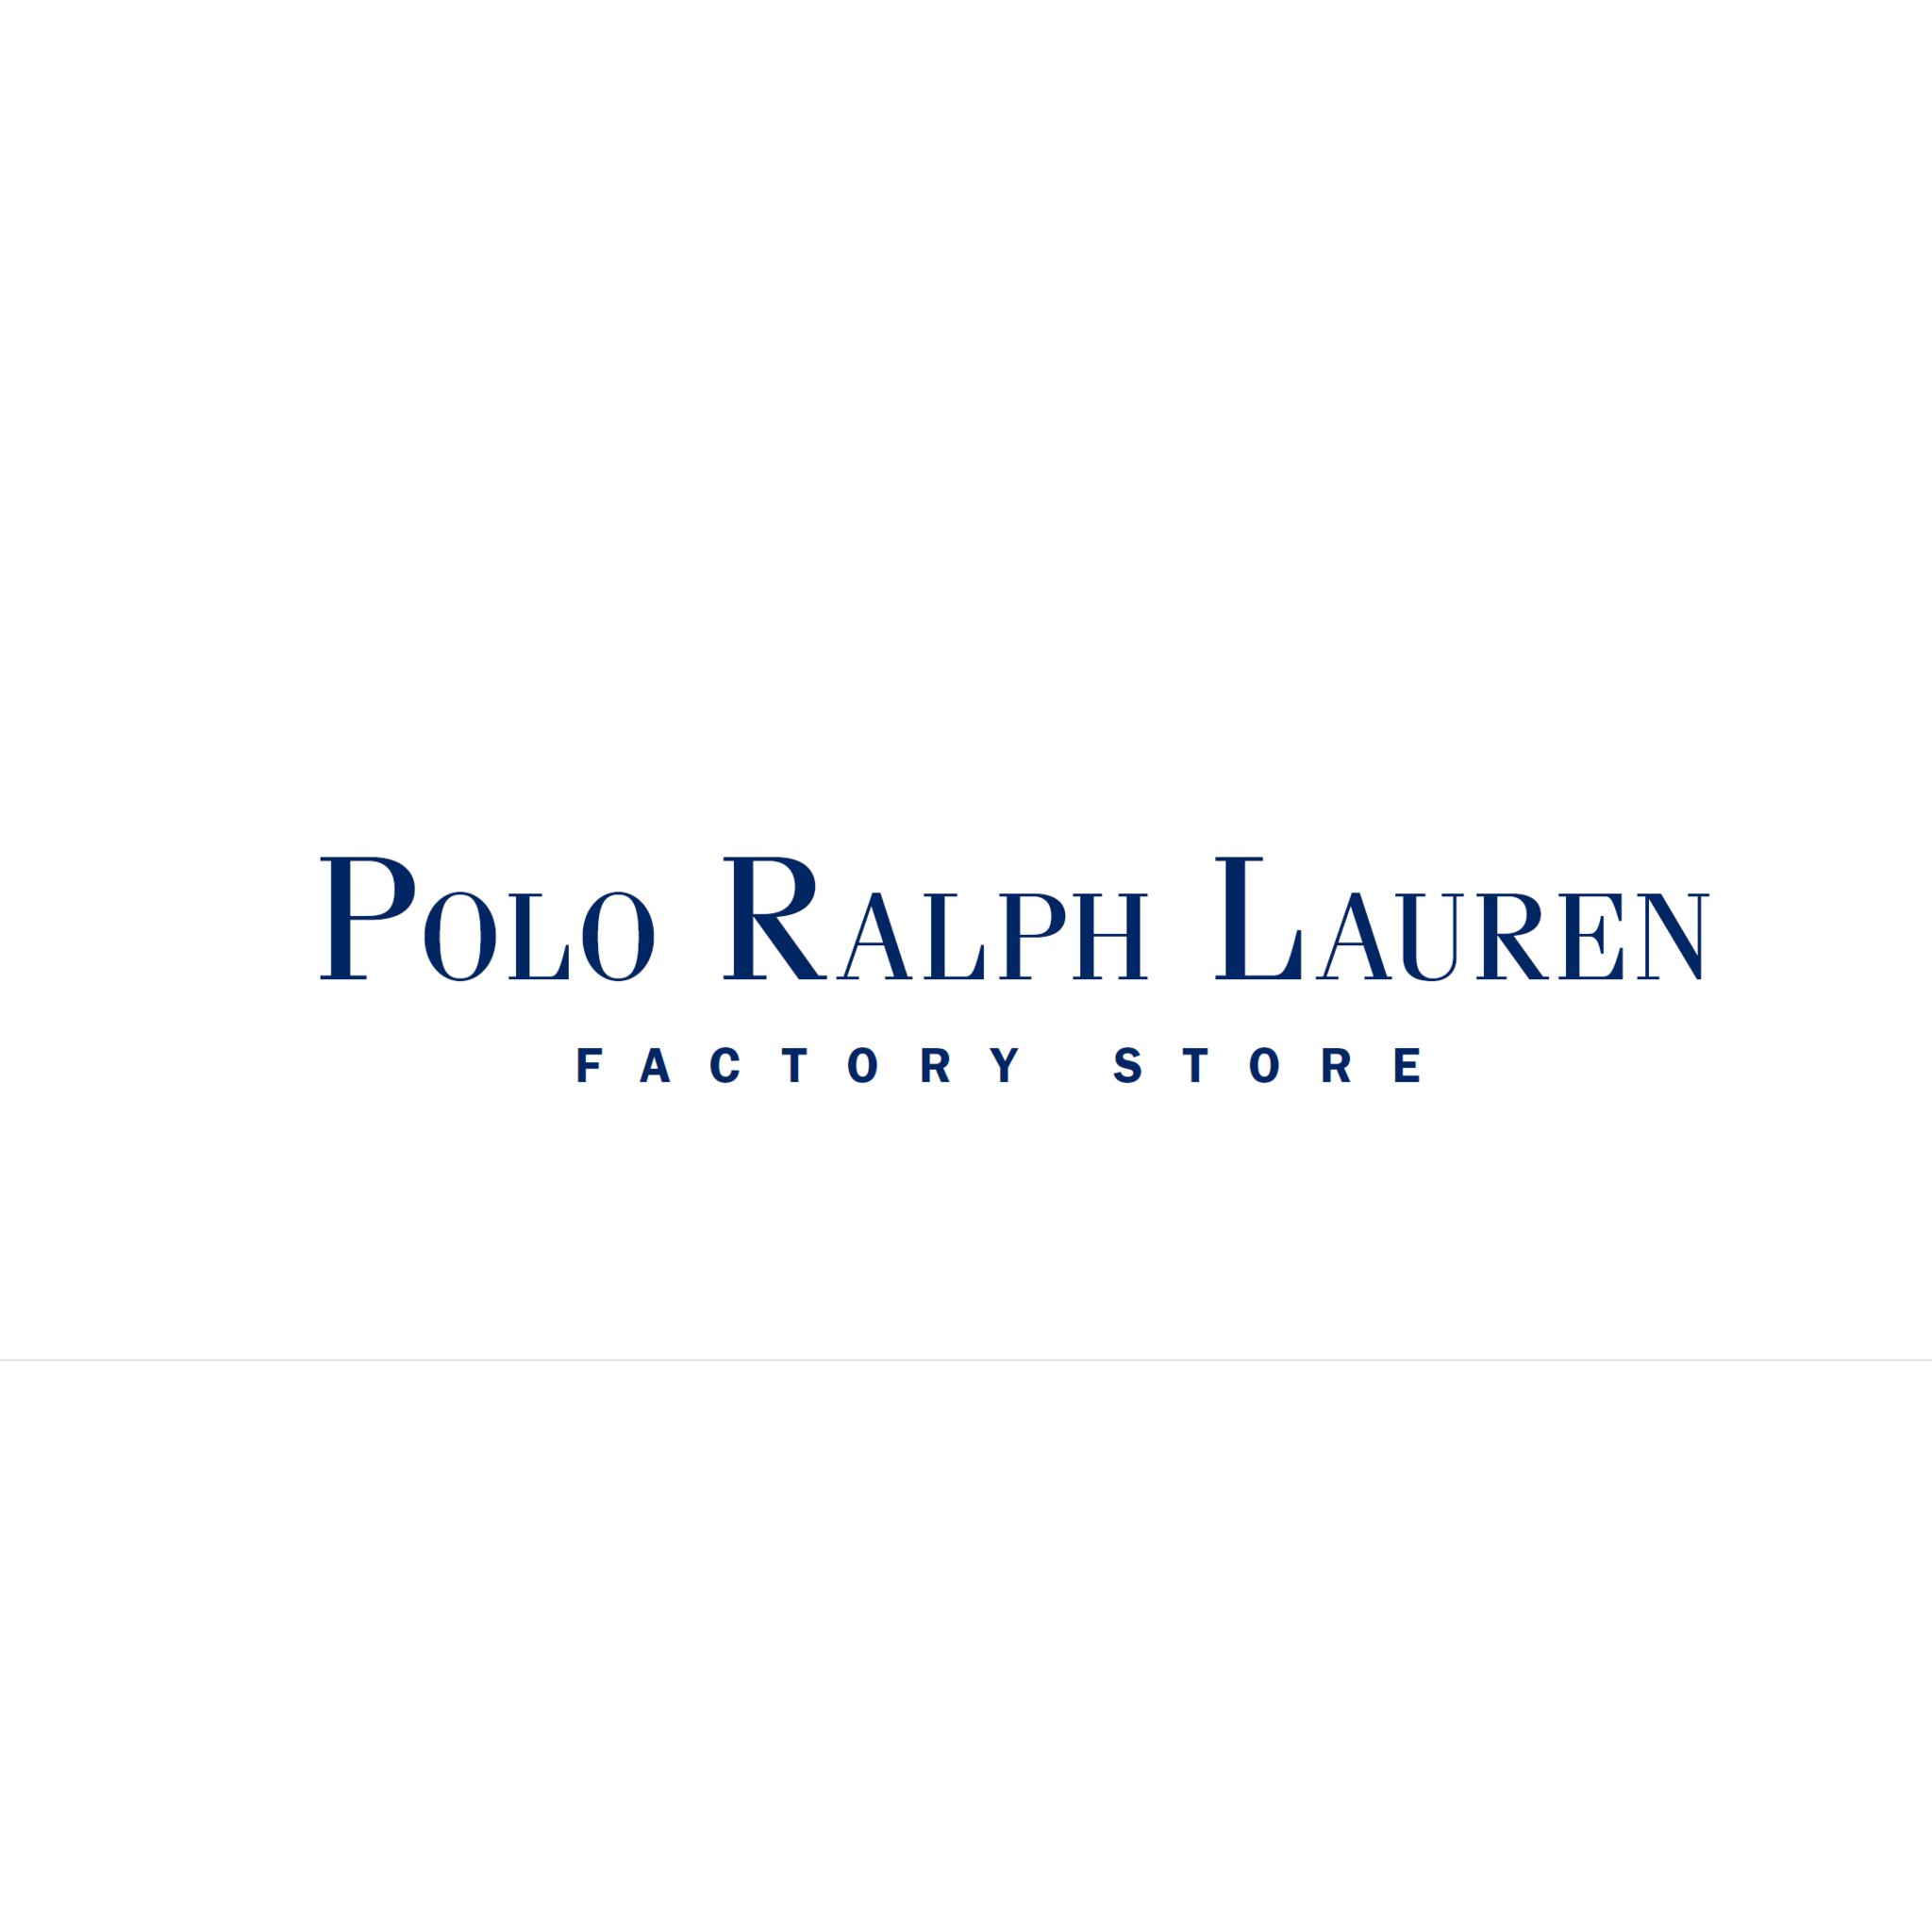 Polo Ralph Lauren Factory Store - Clothing Manufacturers & Wholesalers